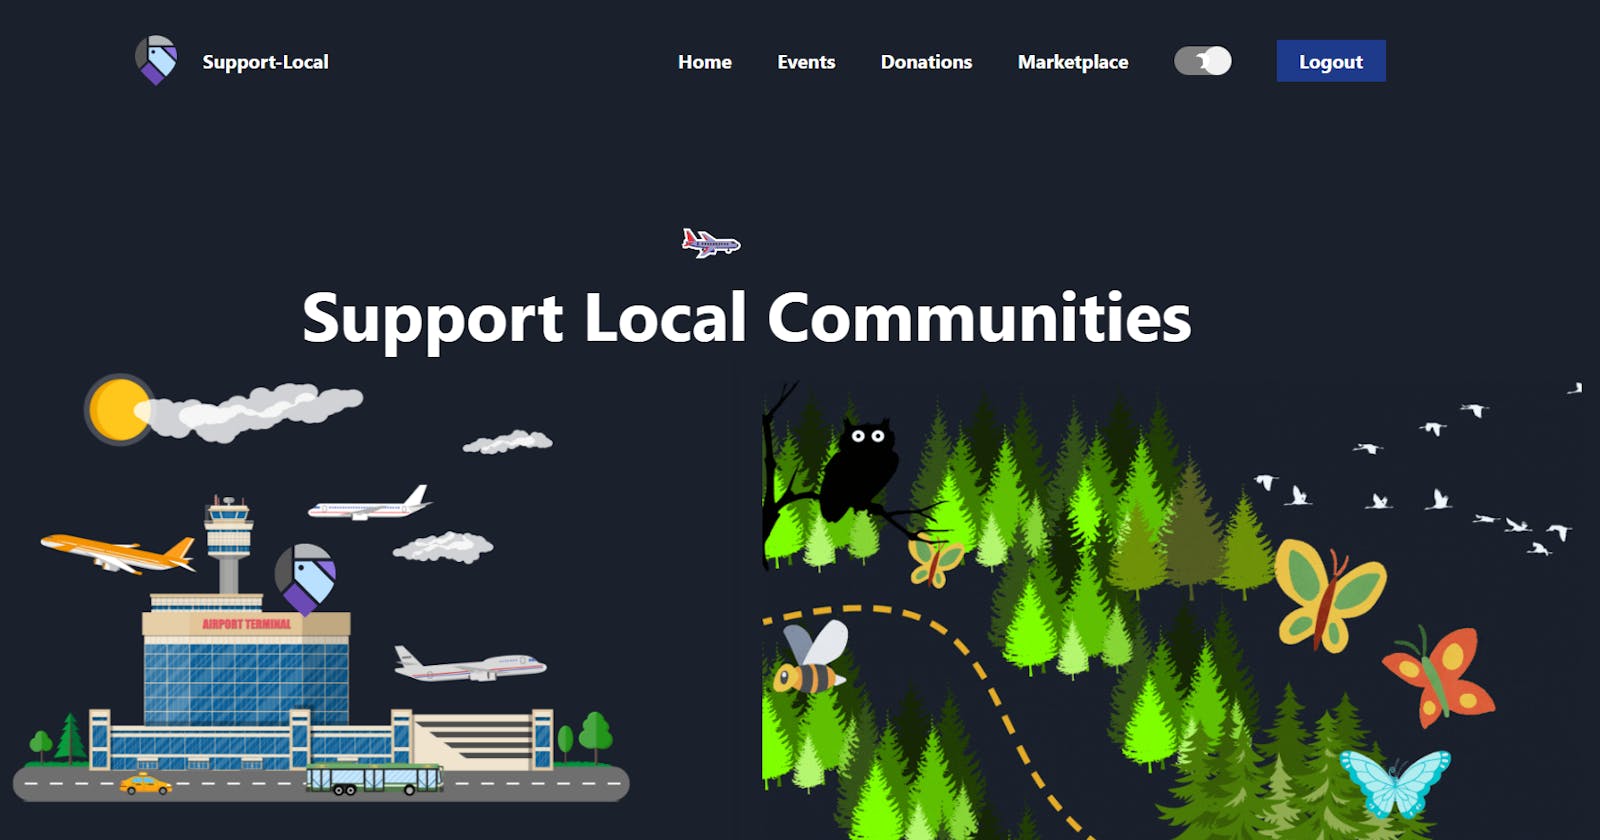 Community Support System - Manage Events . Donations. Sell local artwork